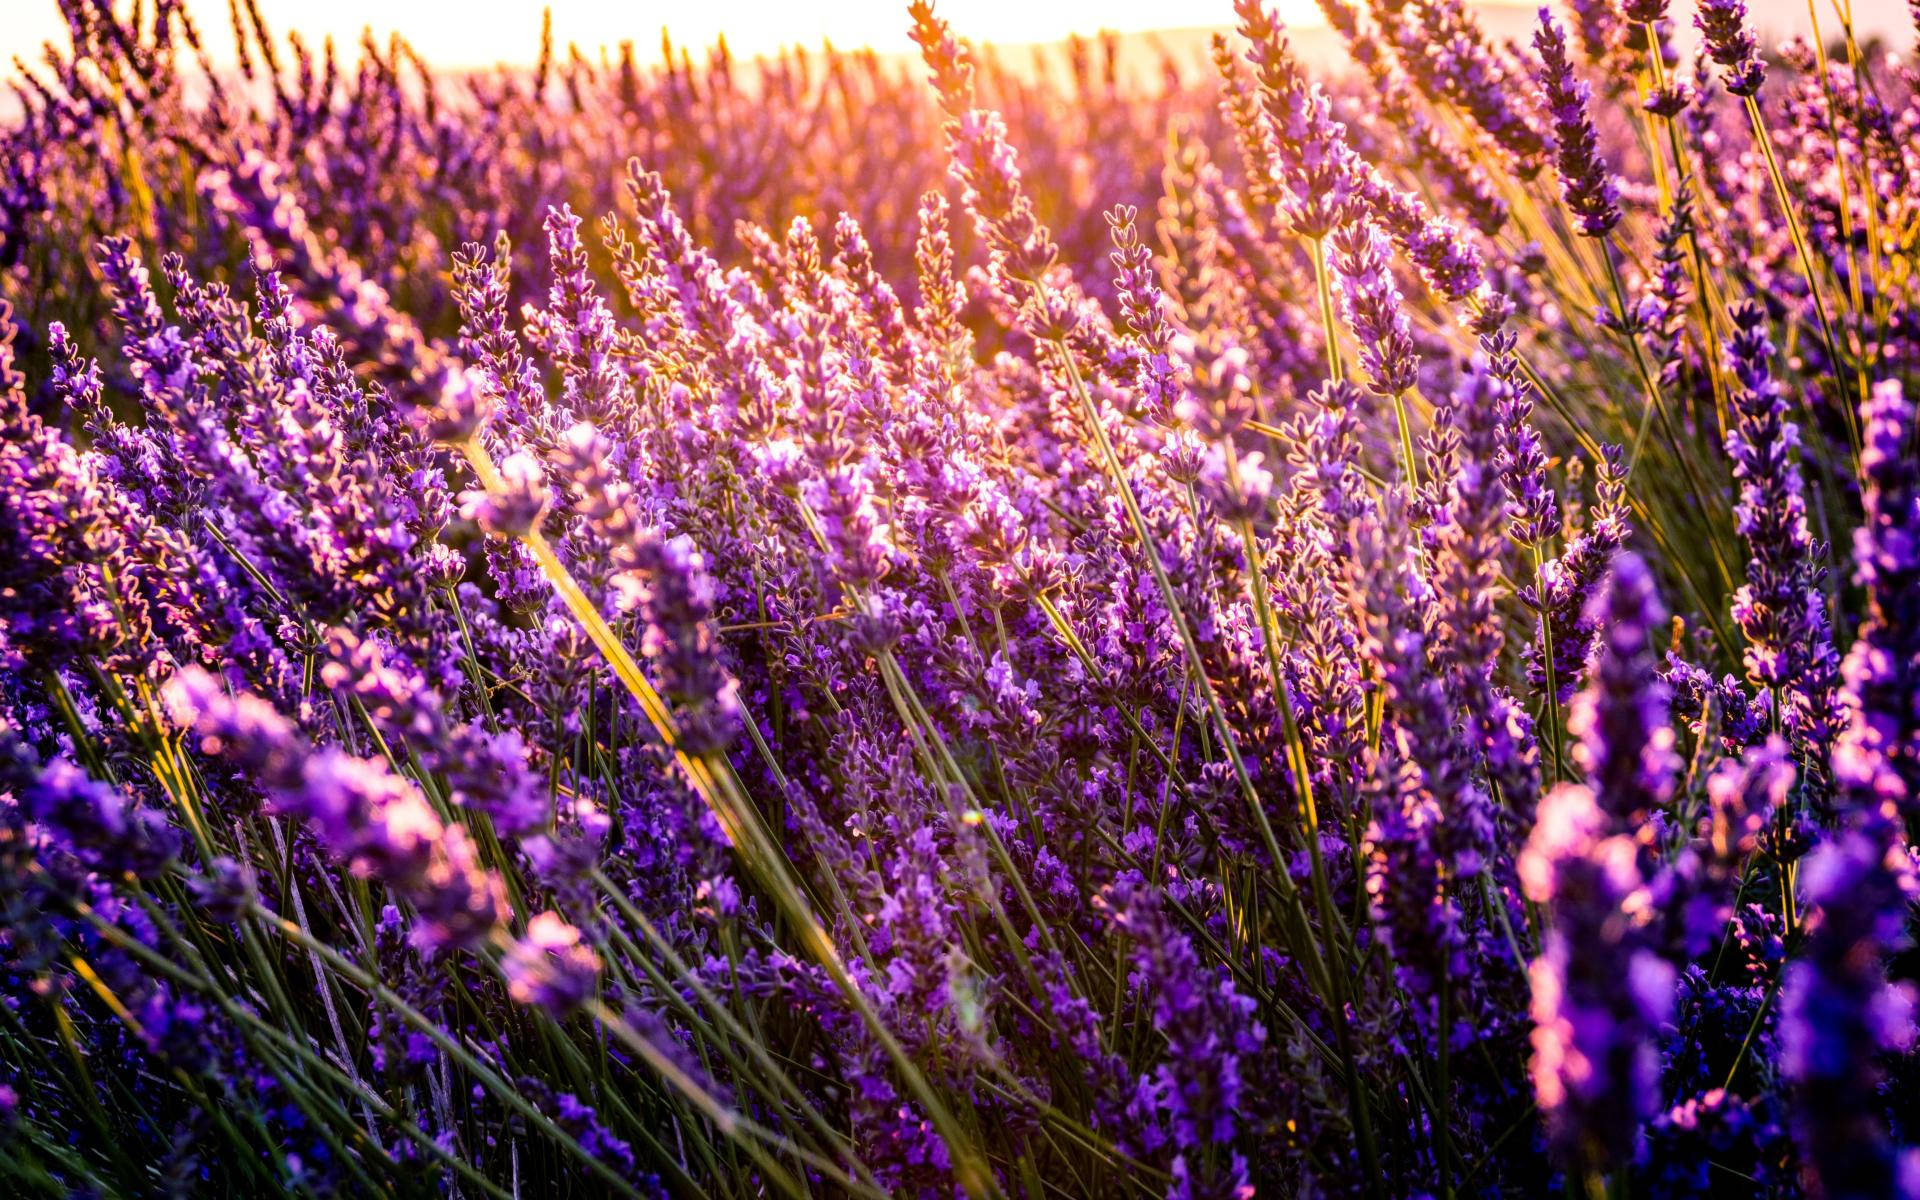 "The beauty of life - a close up of lavender flowers and sunshine" Wallpaper